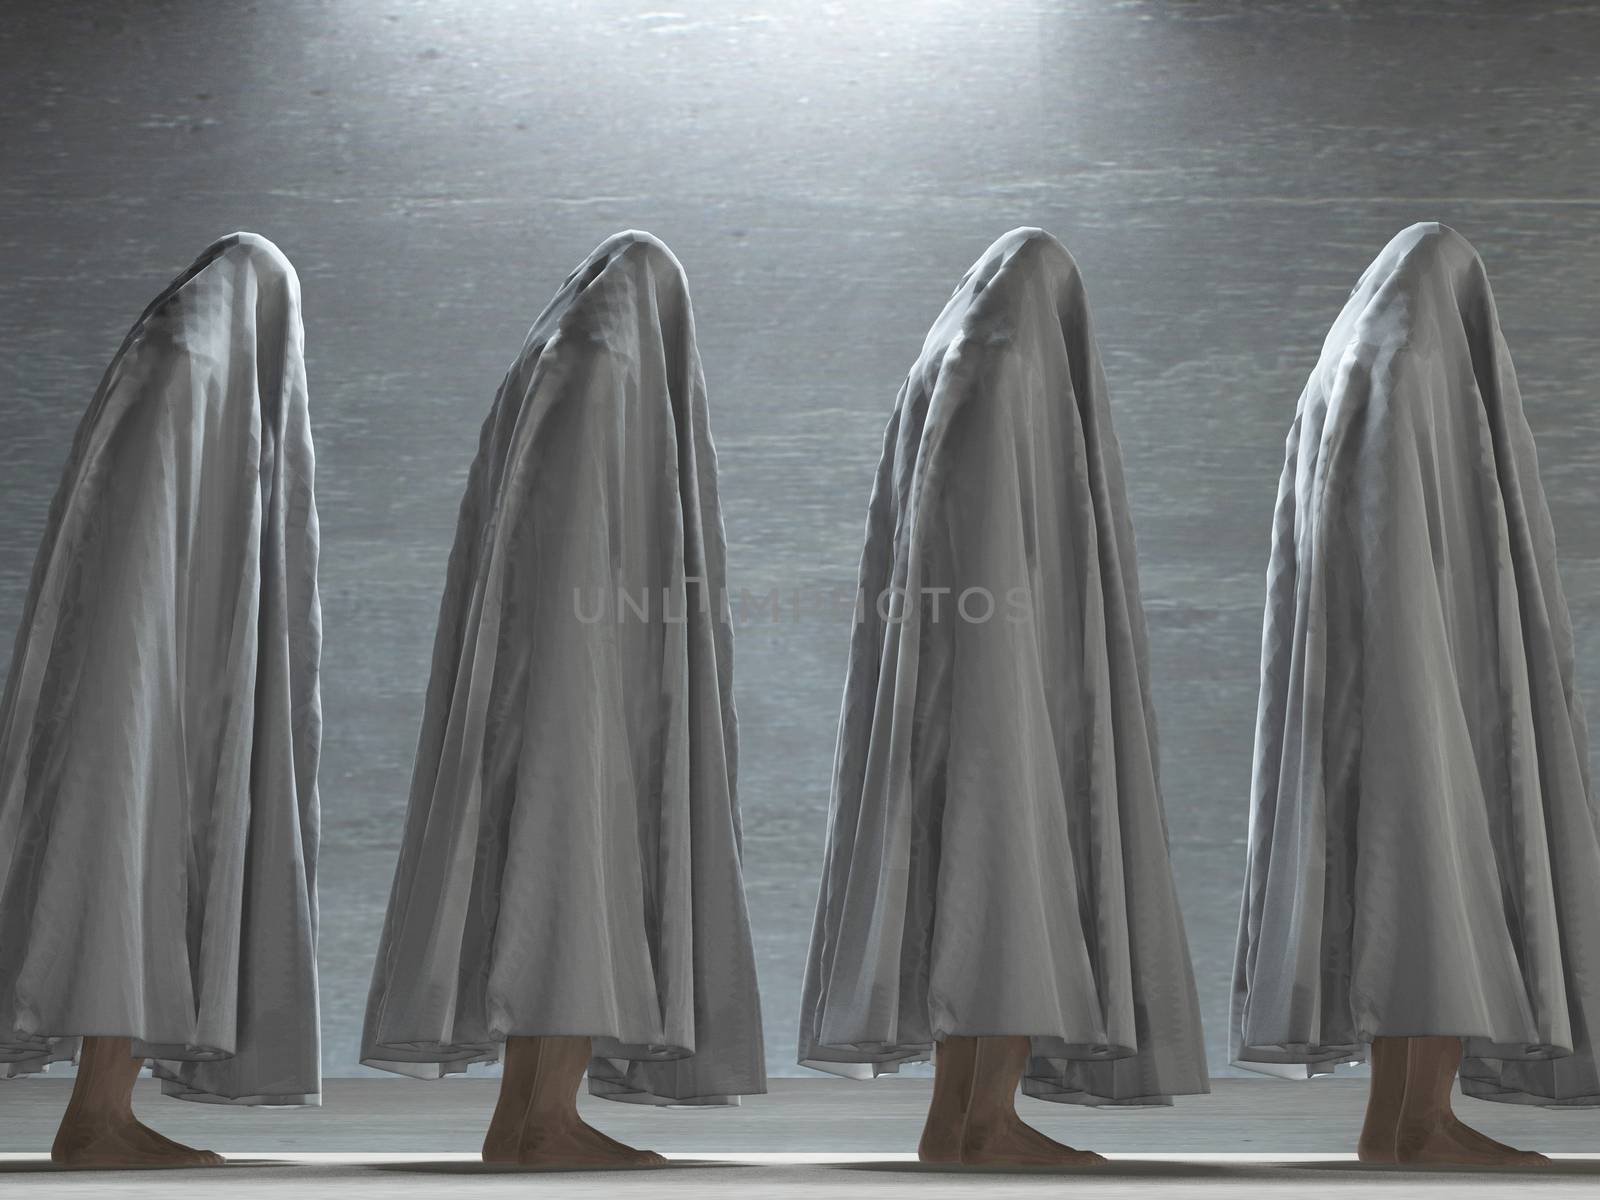 Men covered by cloth by applesstock